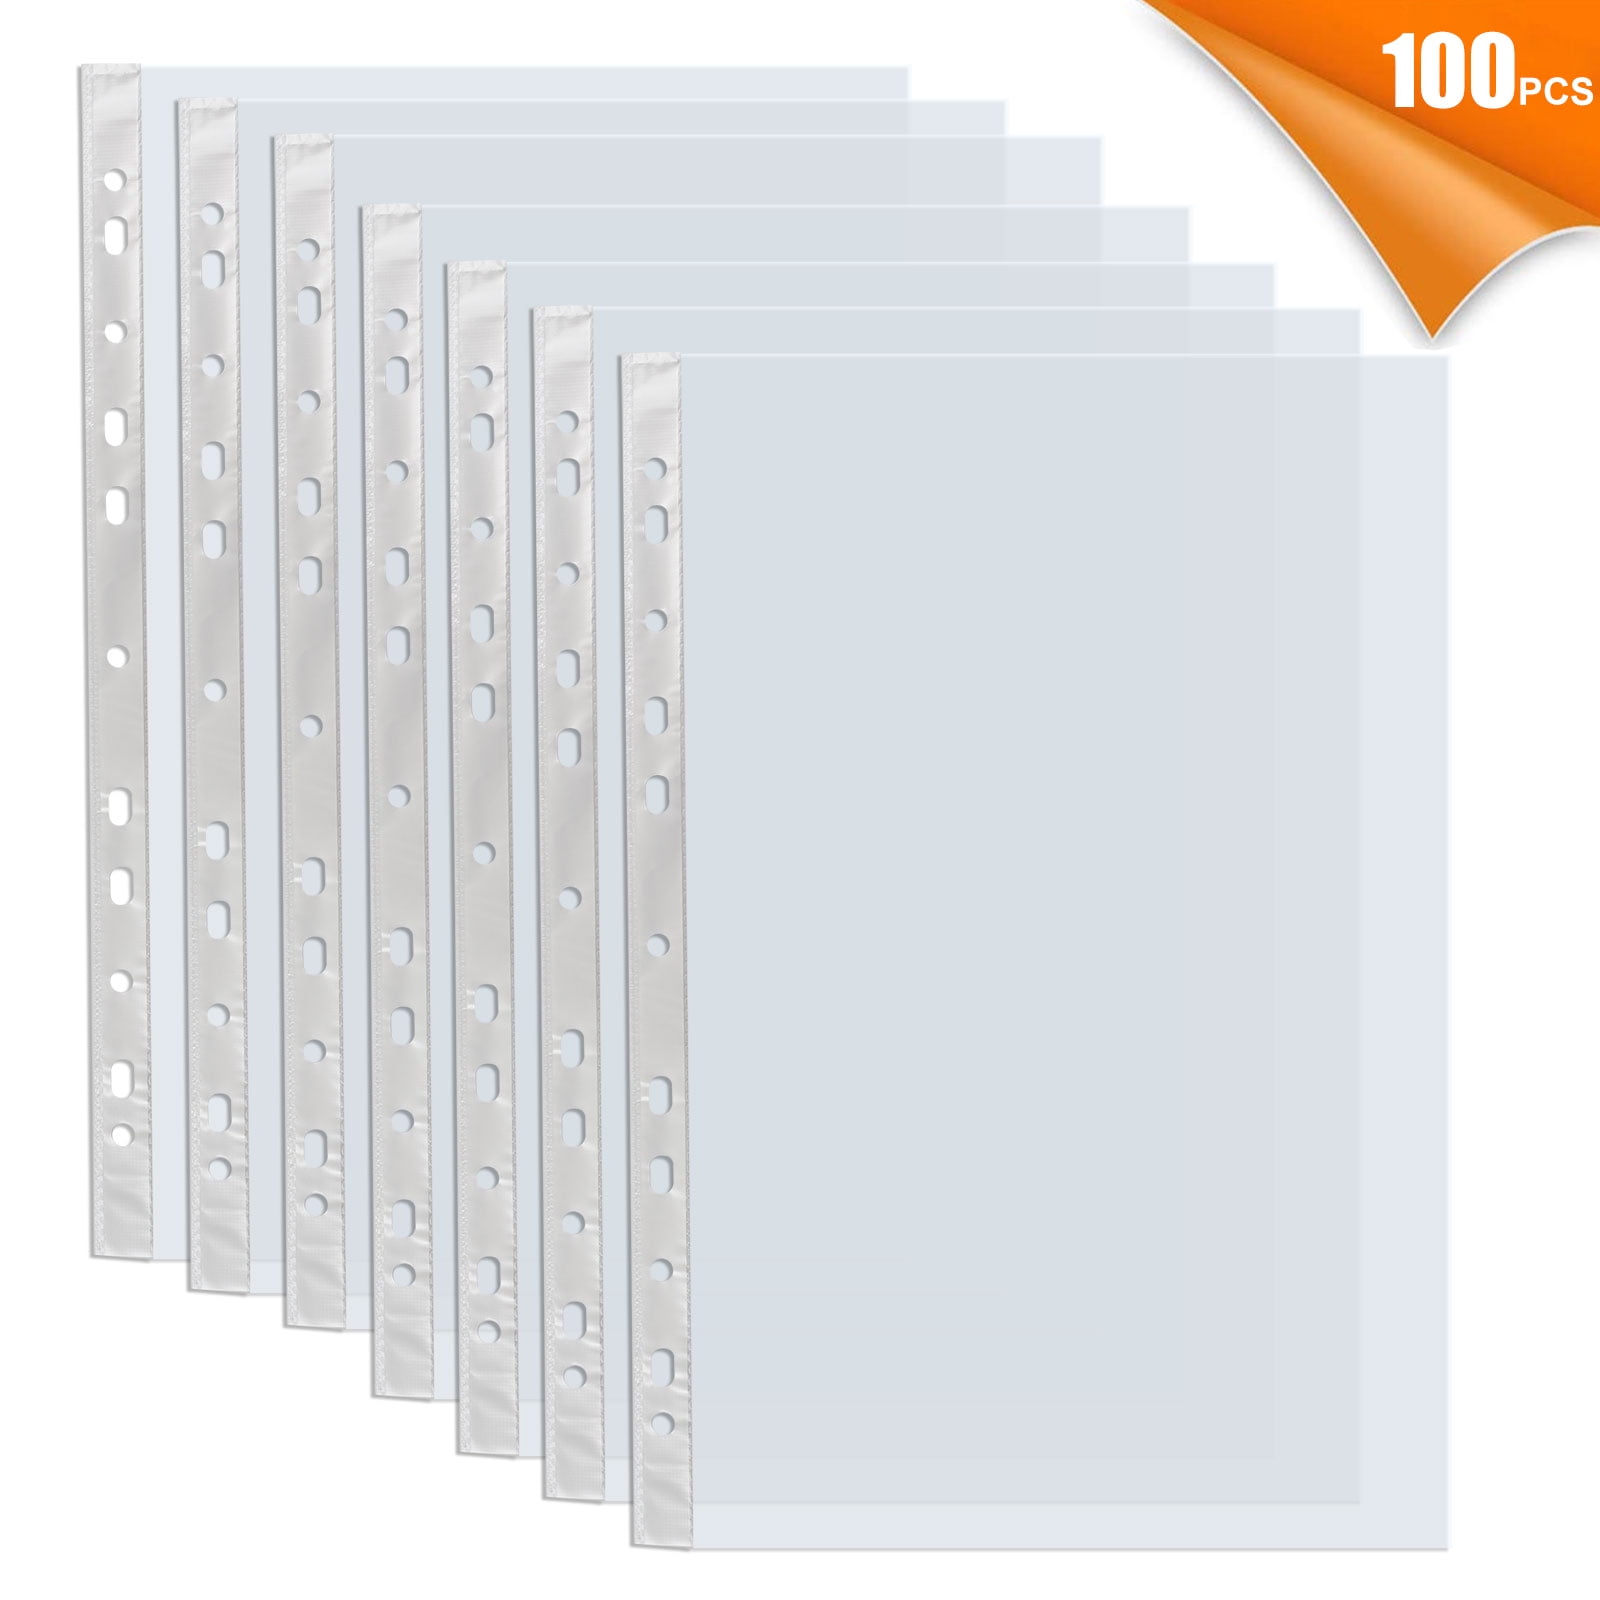 TYH Supplies 200 Pack Clear Sheet Protectors for 3 Ring Binder | 8.5 x 11  Inch | Non-Glare Standard 11 Hole Plastic Page Protectors for Home, Office